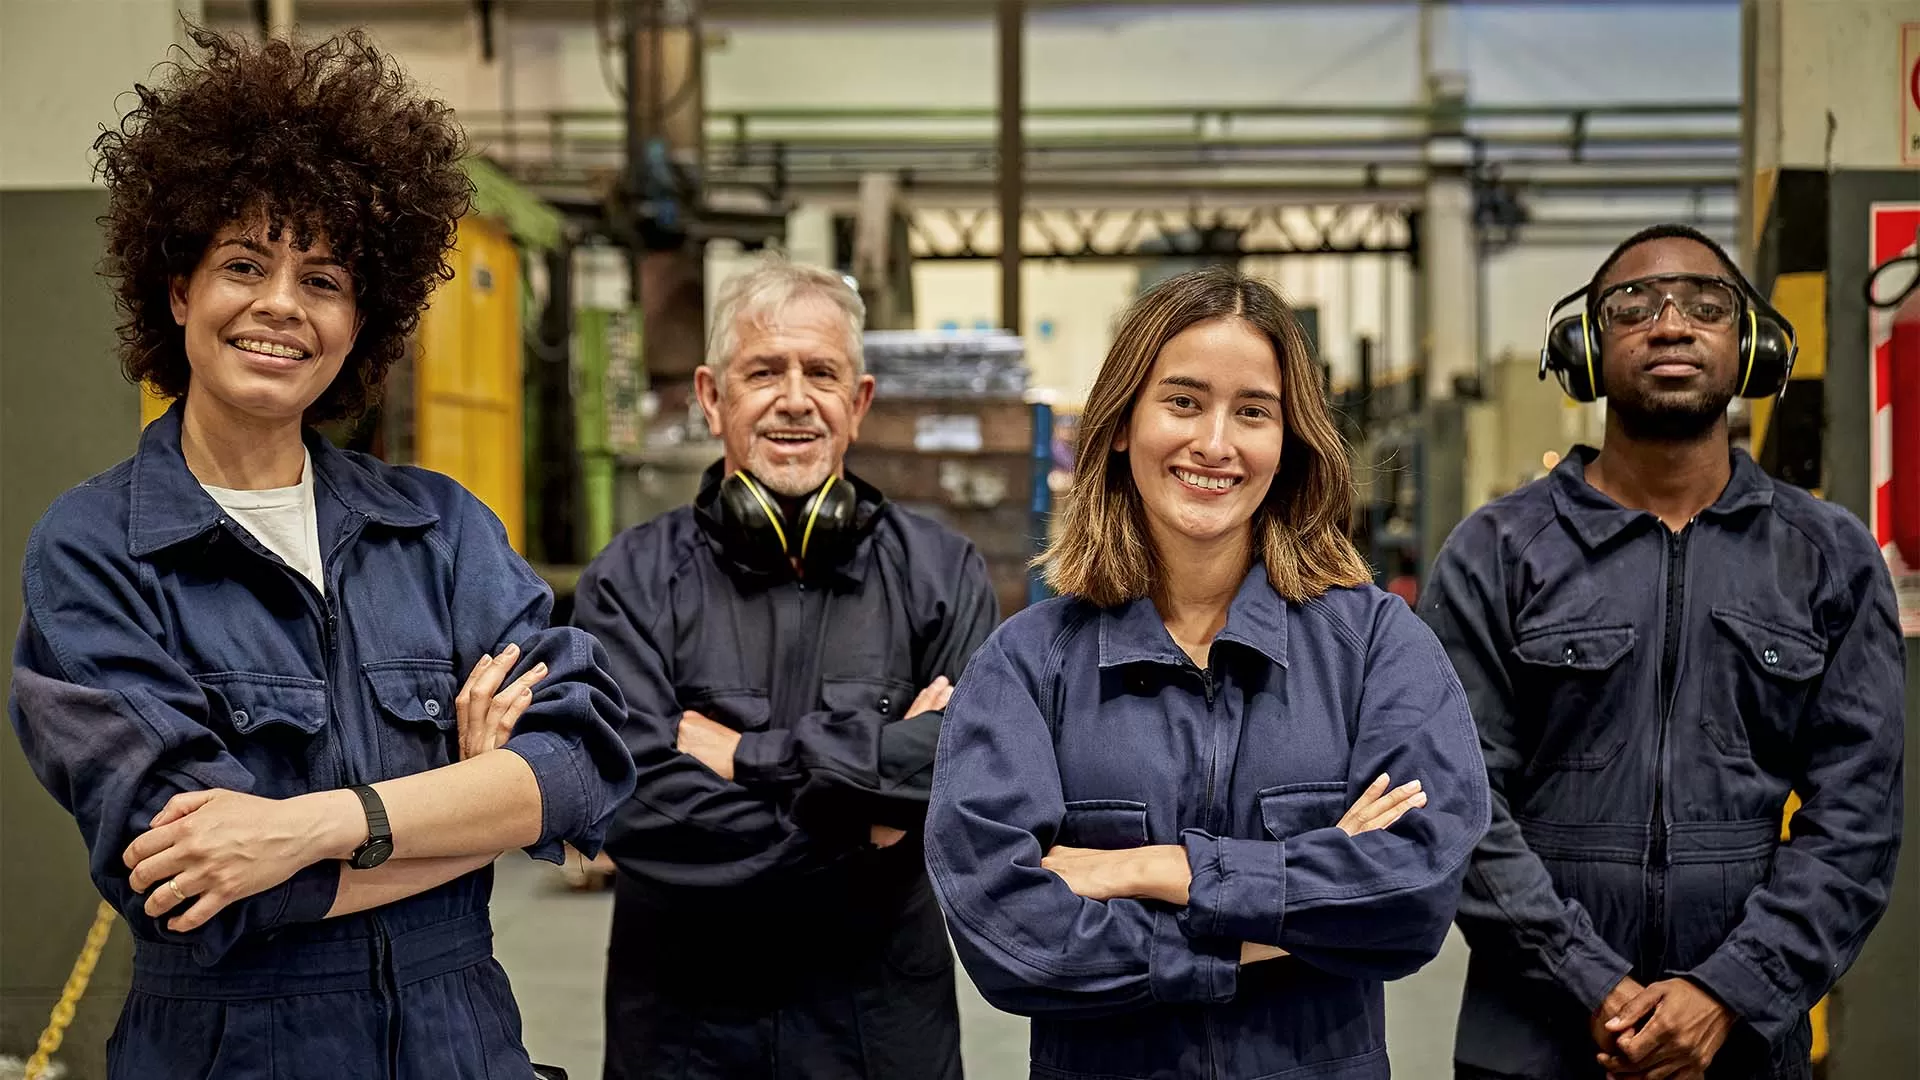 A diverse group of people in a factory setting smiling at the camera